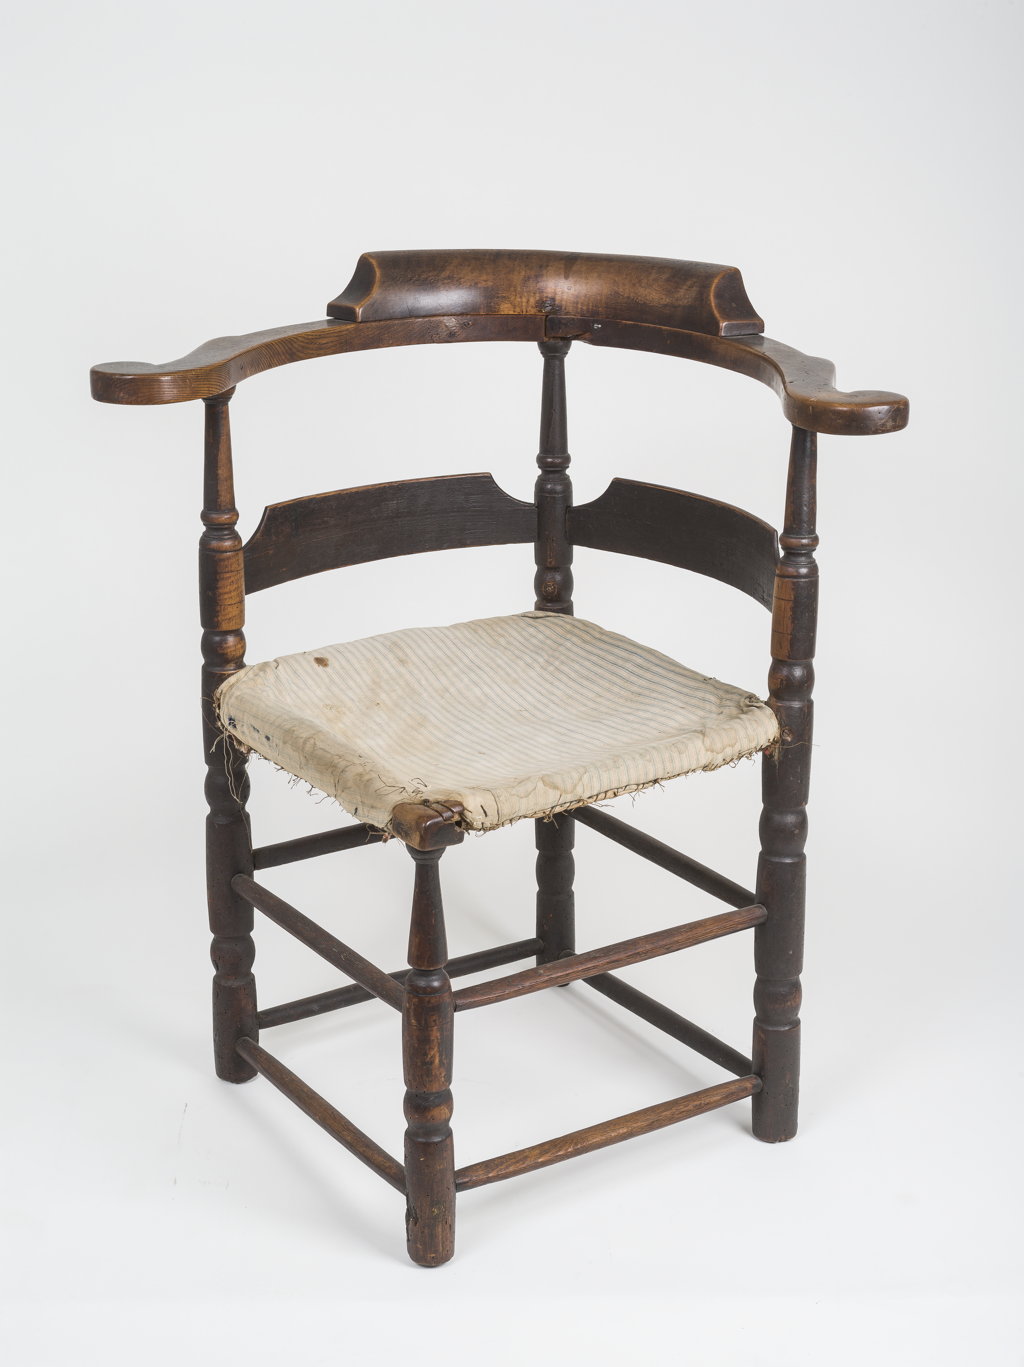  A fine William and Mary corner chair